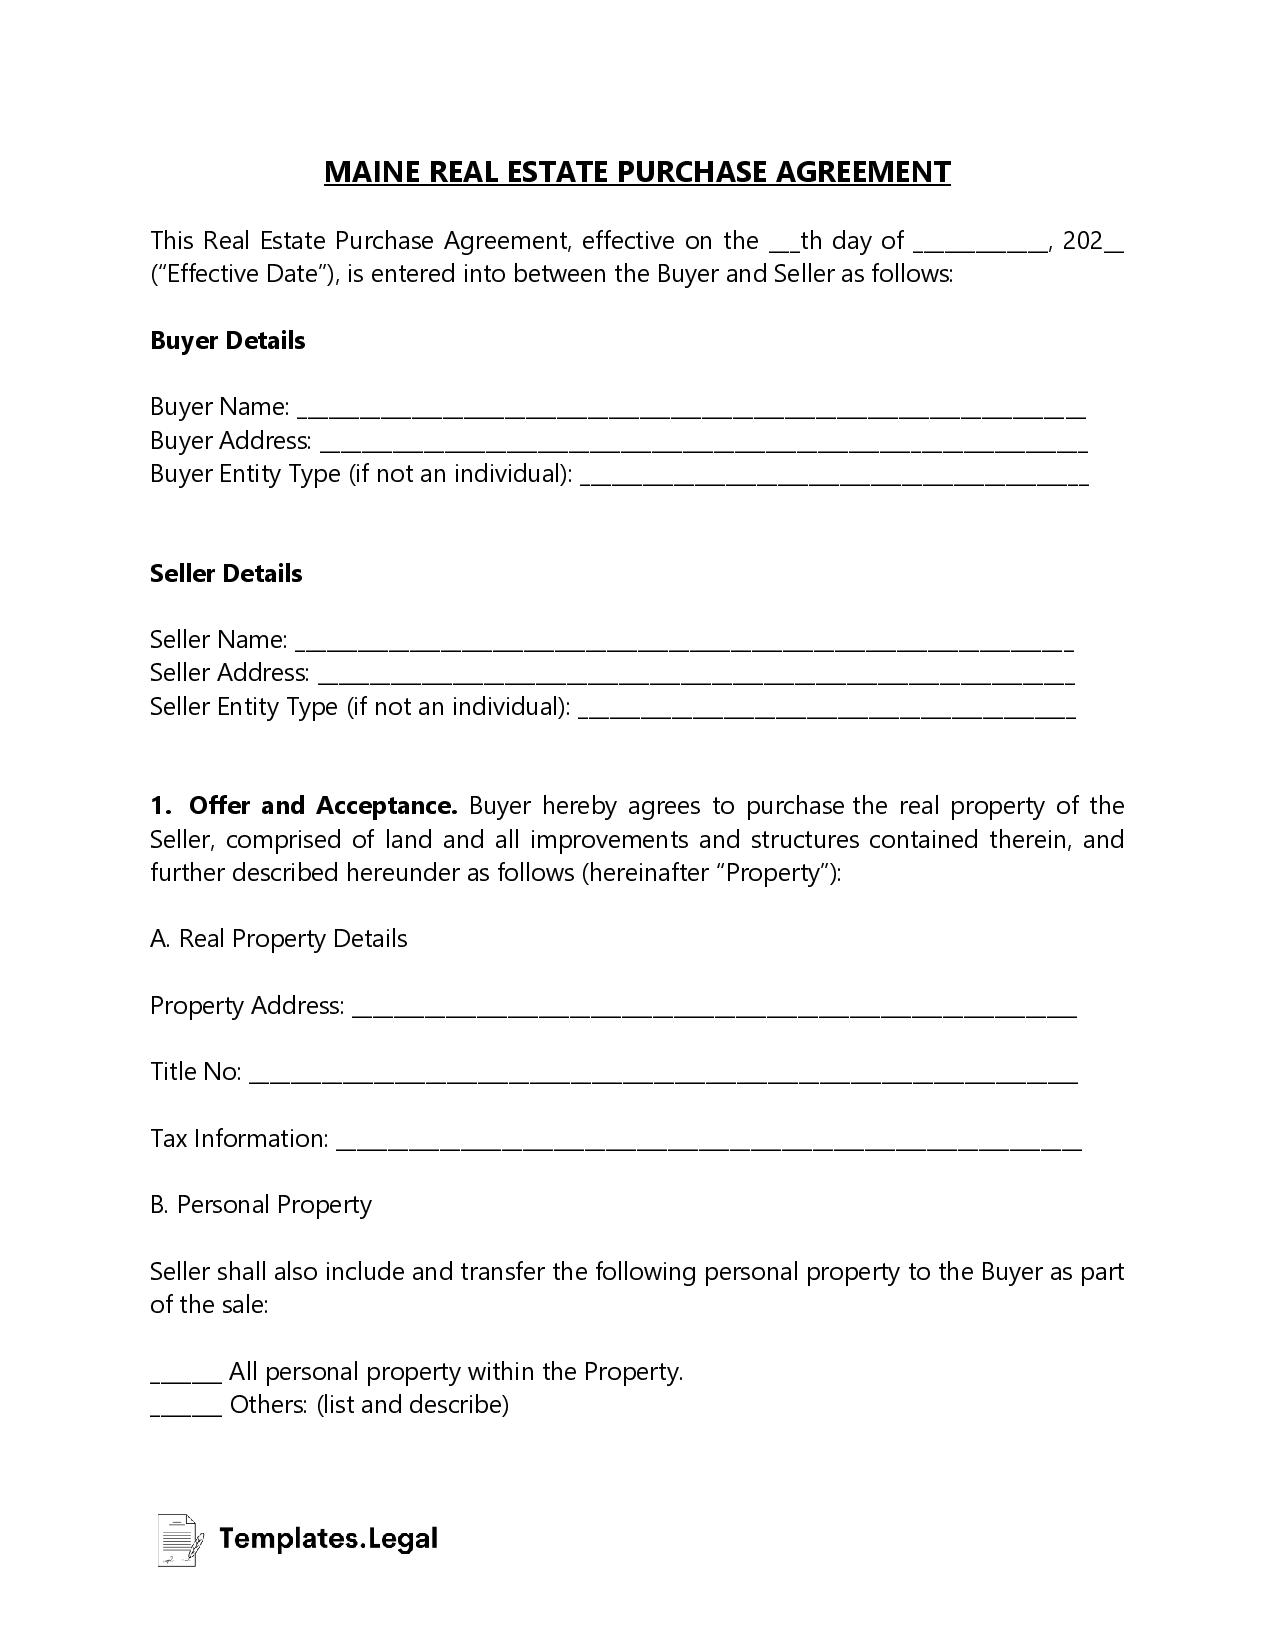 Maine Real Estate Purchase Agreement - Templates.Legal